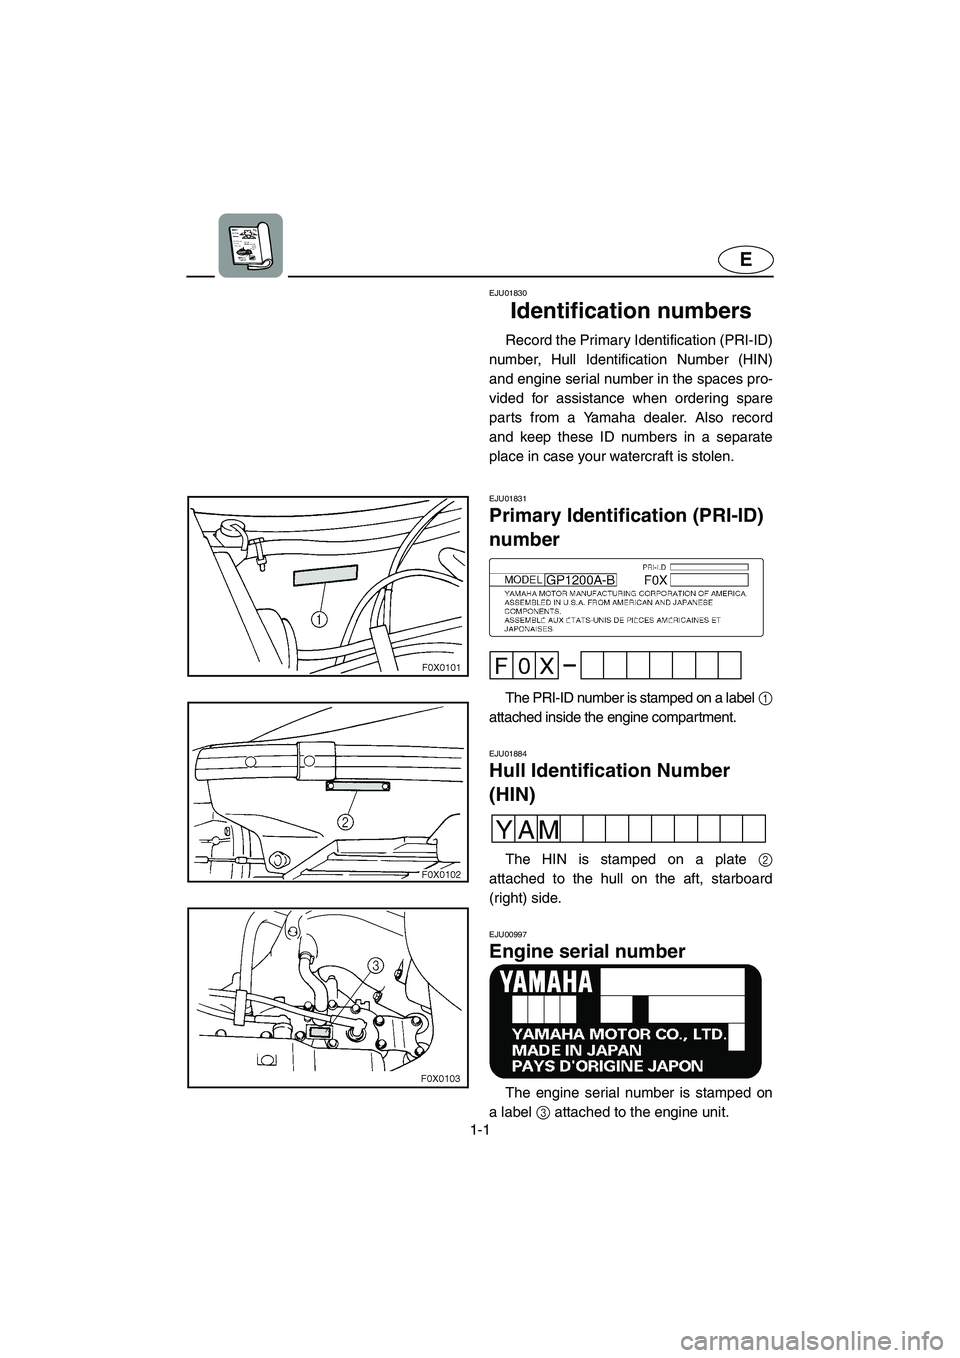 YAMAHA GP1200 2003  Owners Manual 1-1
E
EJU01830
Identification numbers 
Record the Primary Identification (PRI-ID)
number, Hull Identification Number (HIN)
and engine serial number in the spaces pro-
vided for assistance when orderin